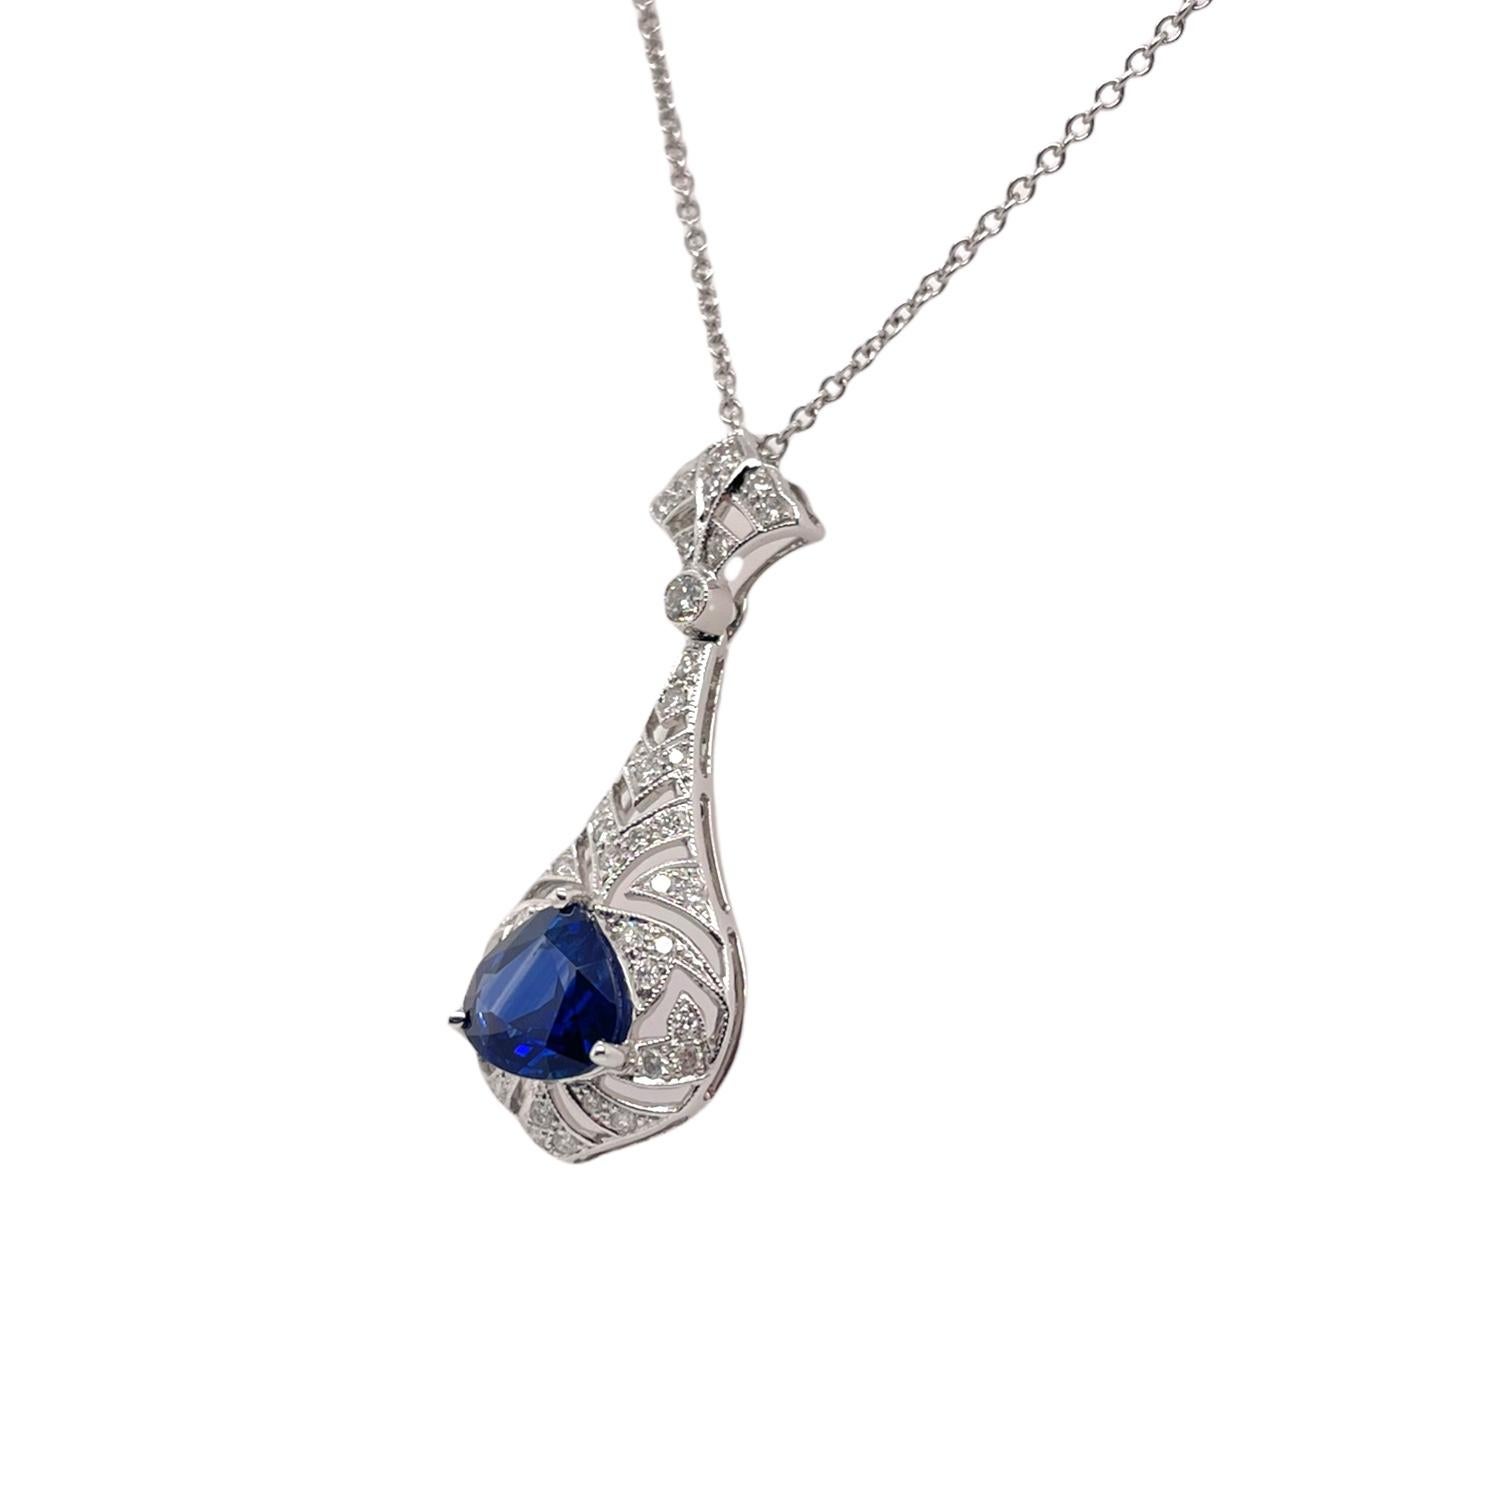 Pendant contains 1 center pear shape sapphire weighing 1.85ct. Center stone is surrounded by an Art Deco style pendant containing 42 round brilliant diamonds, 0.35tcw. Diamonds are near colorless and SI1 in clarity. Total pendant measures